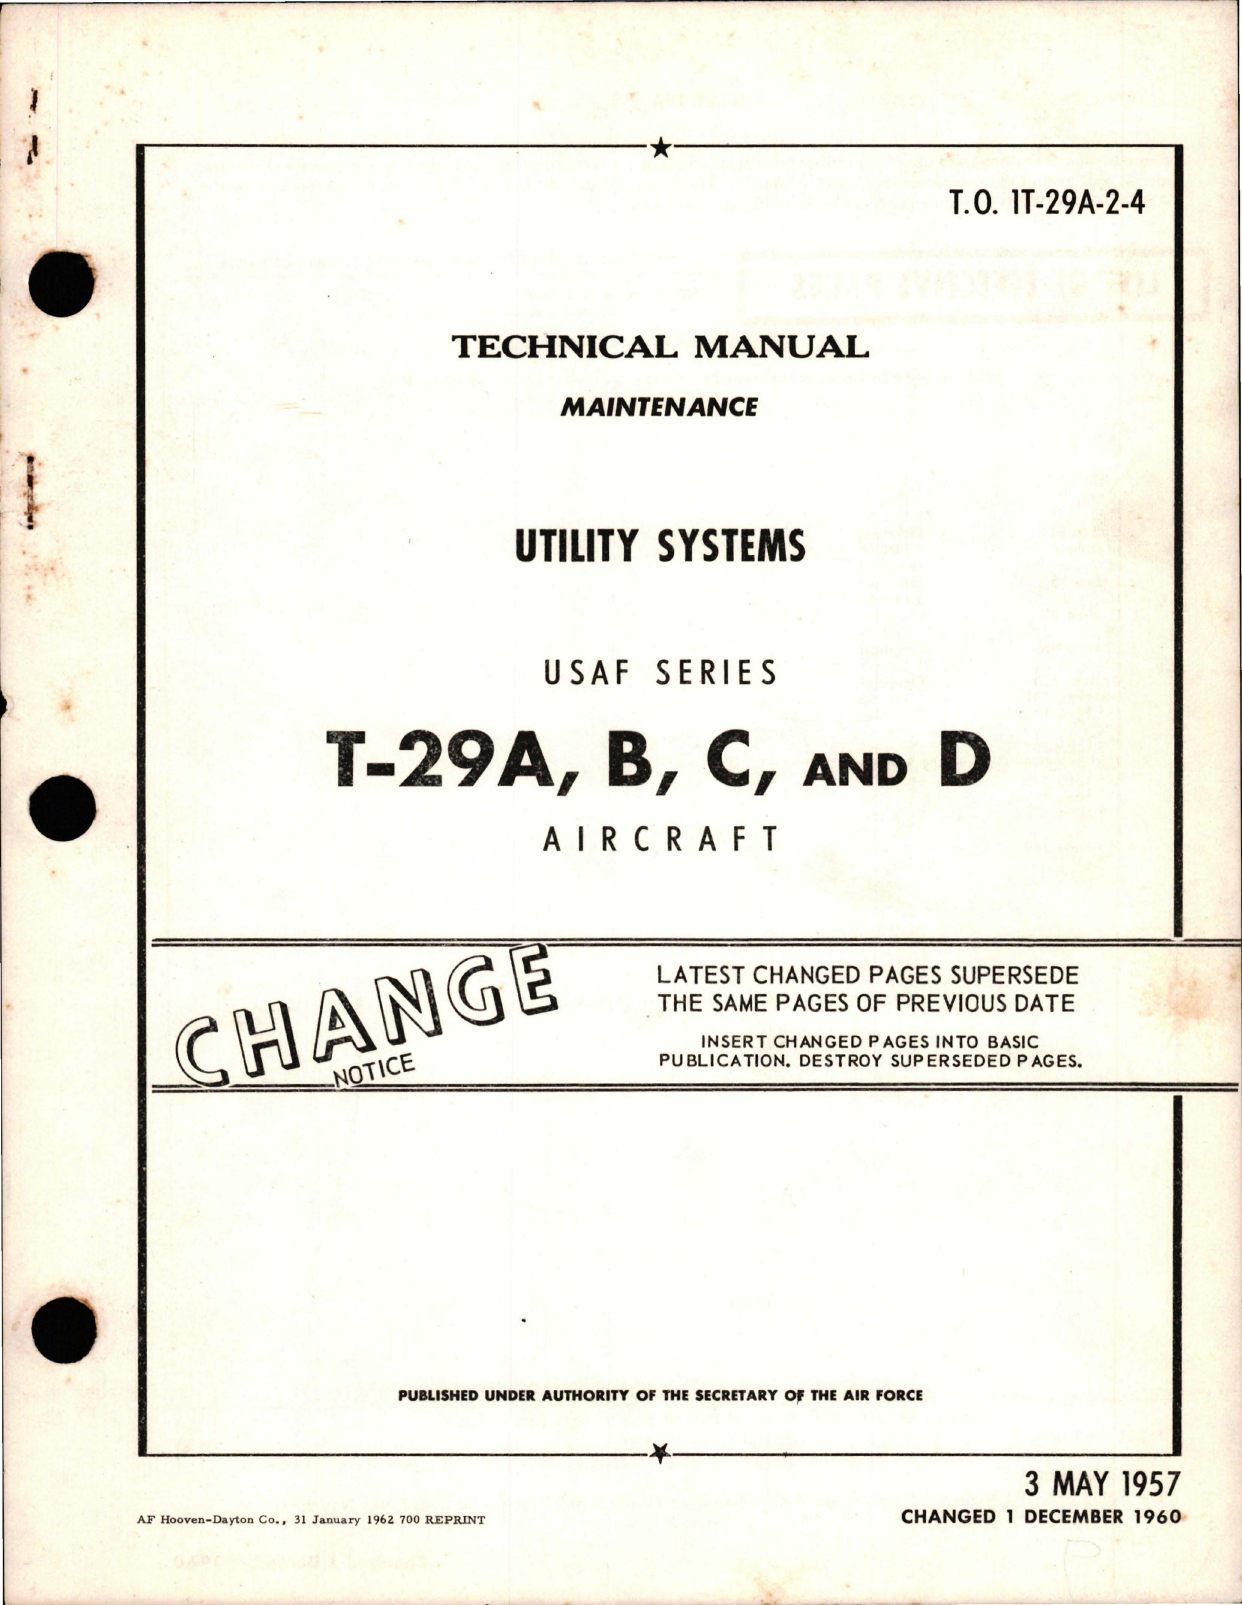 Sample page 1 from AirCorps Library document: Maintenance for Utility Systems for T-29A, T-29B, T-29C and T-29D